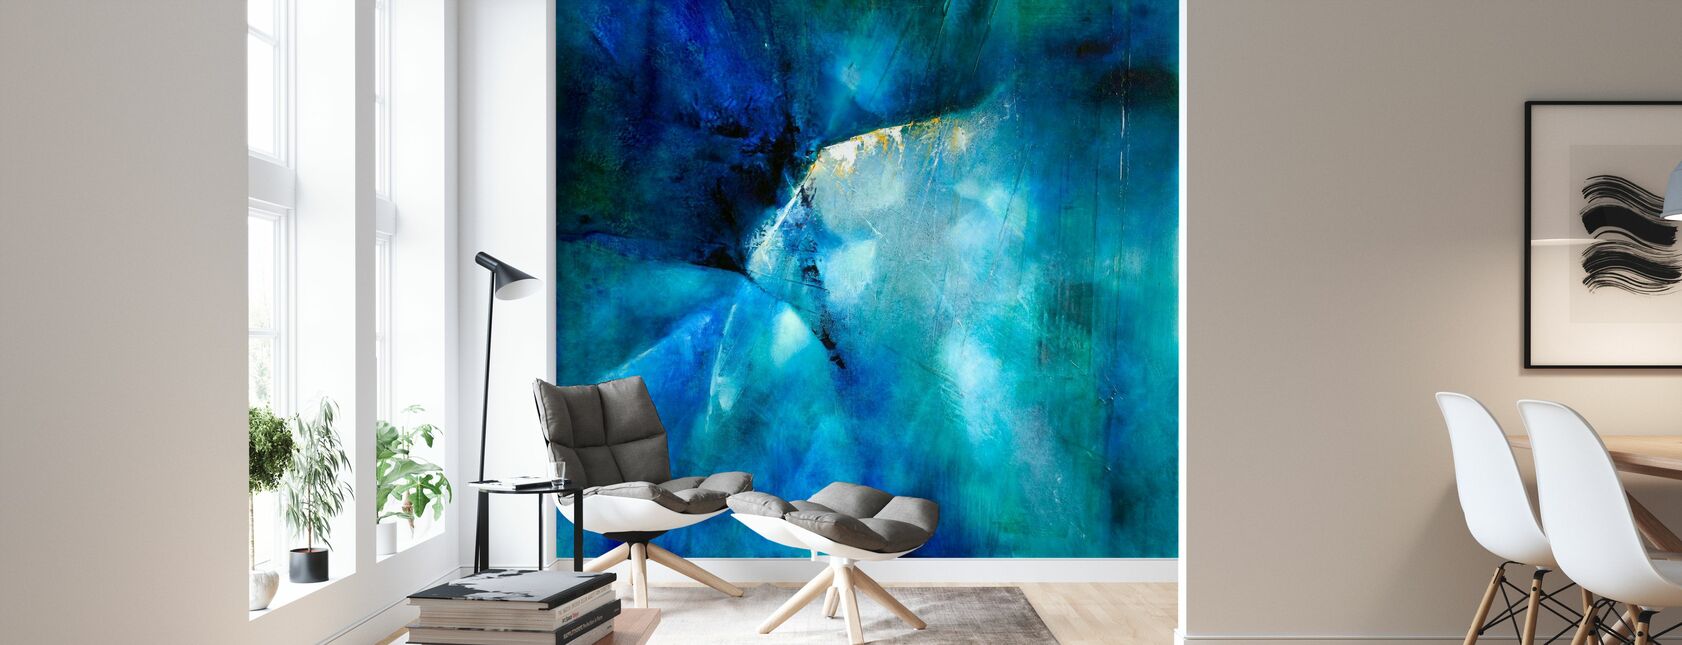 Composition in Blue - Wallpaper - Living Room